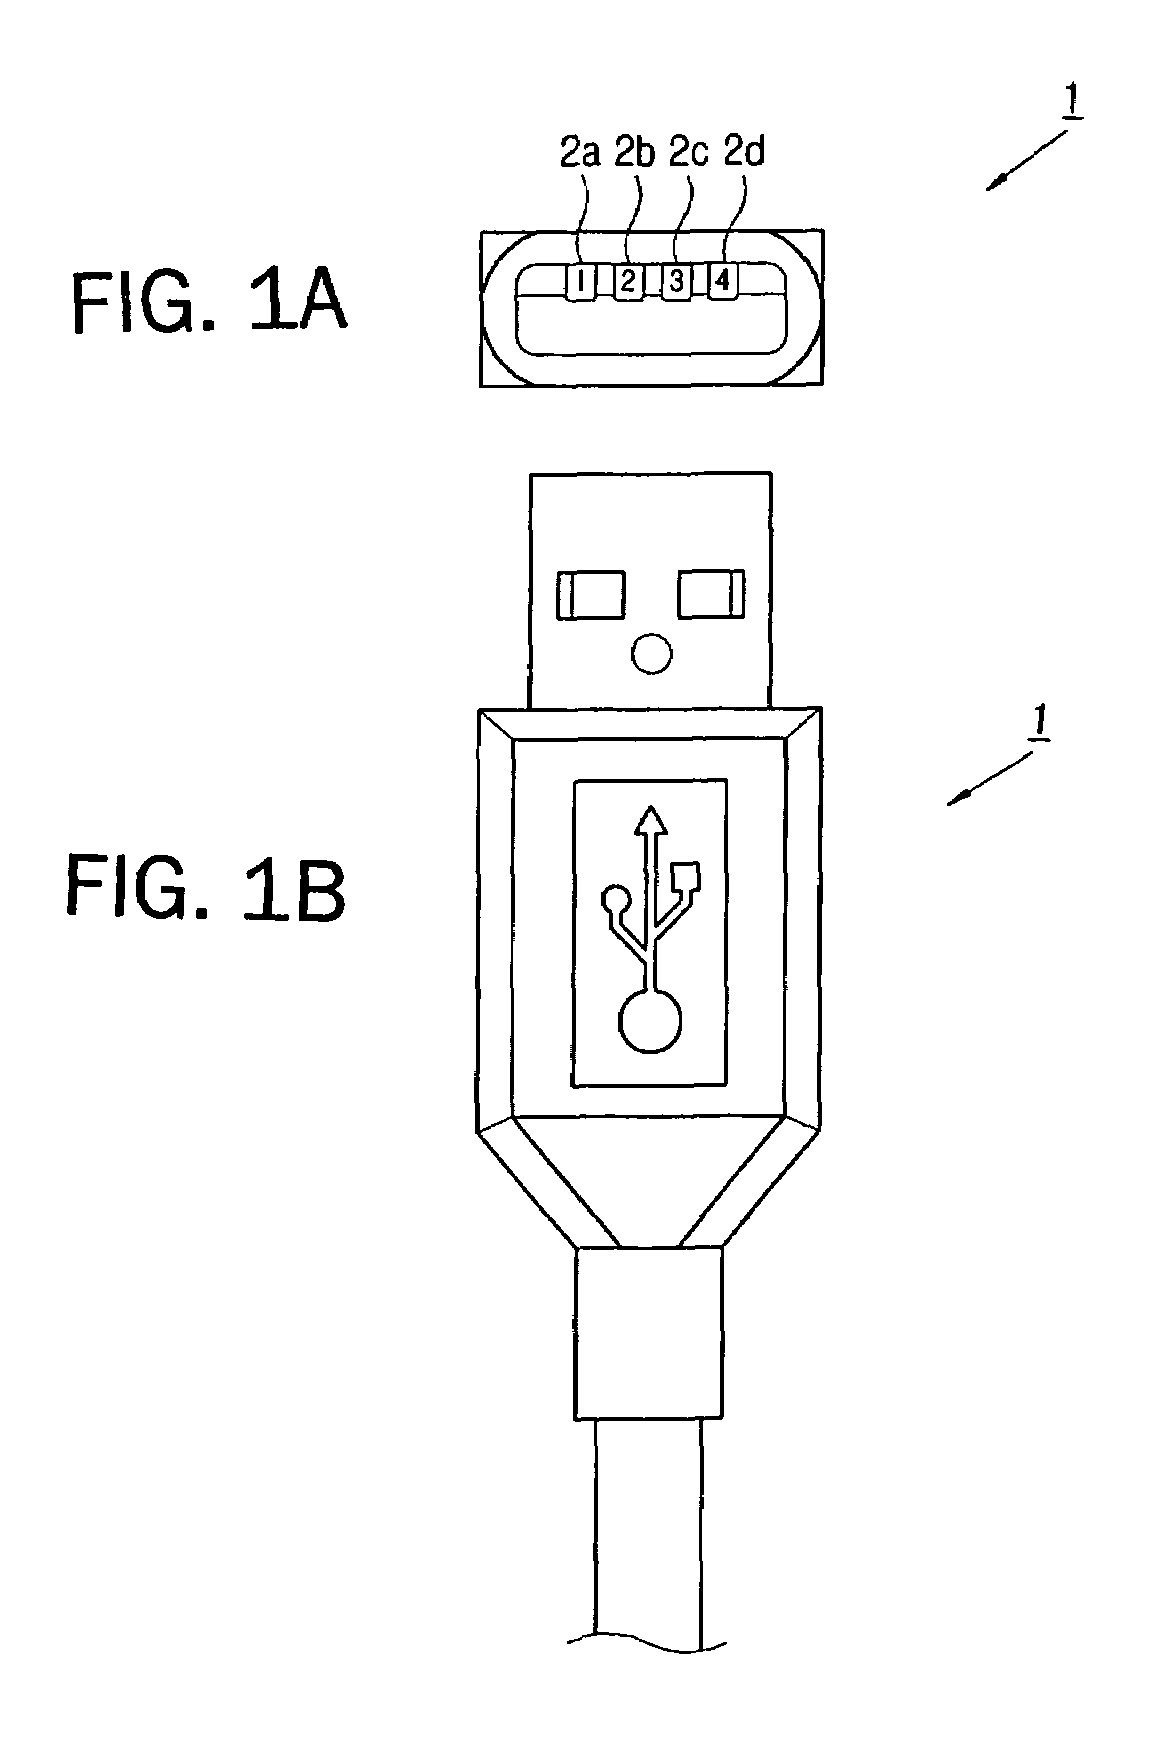 USB circuit device for preventing reverse current from external device